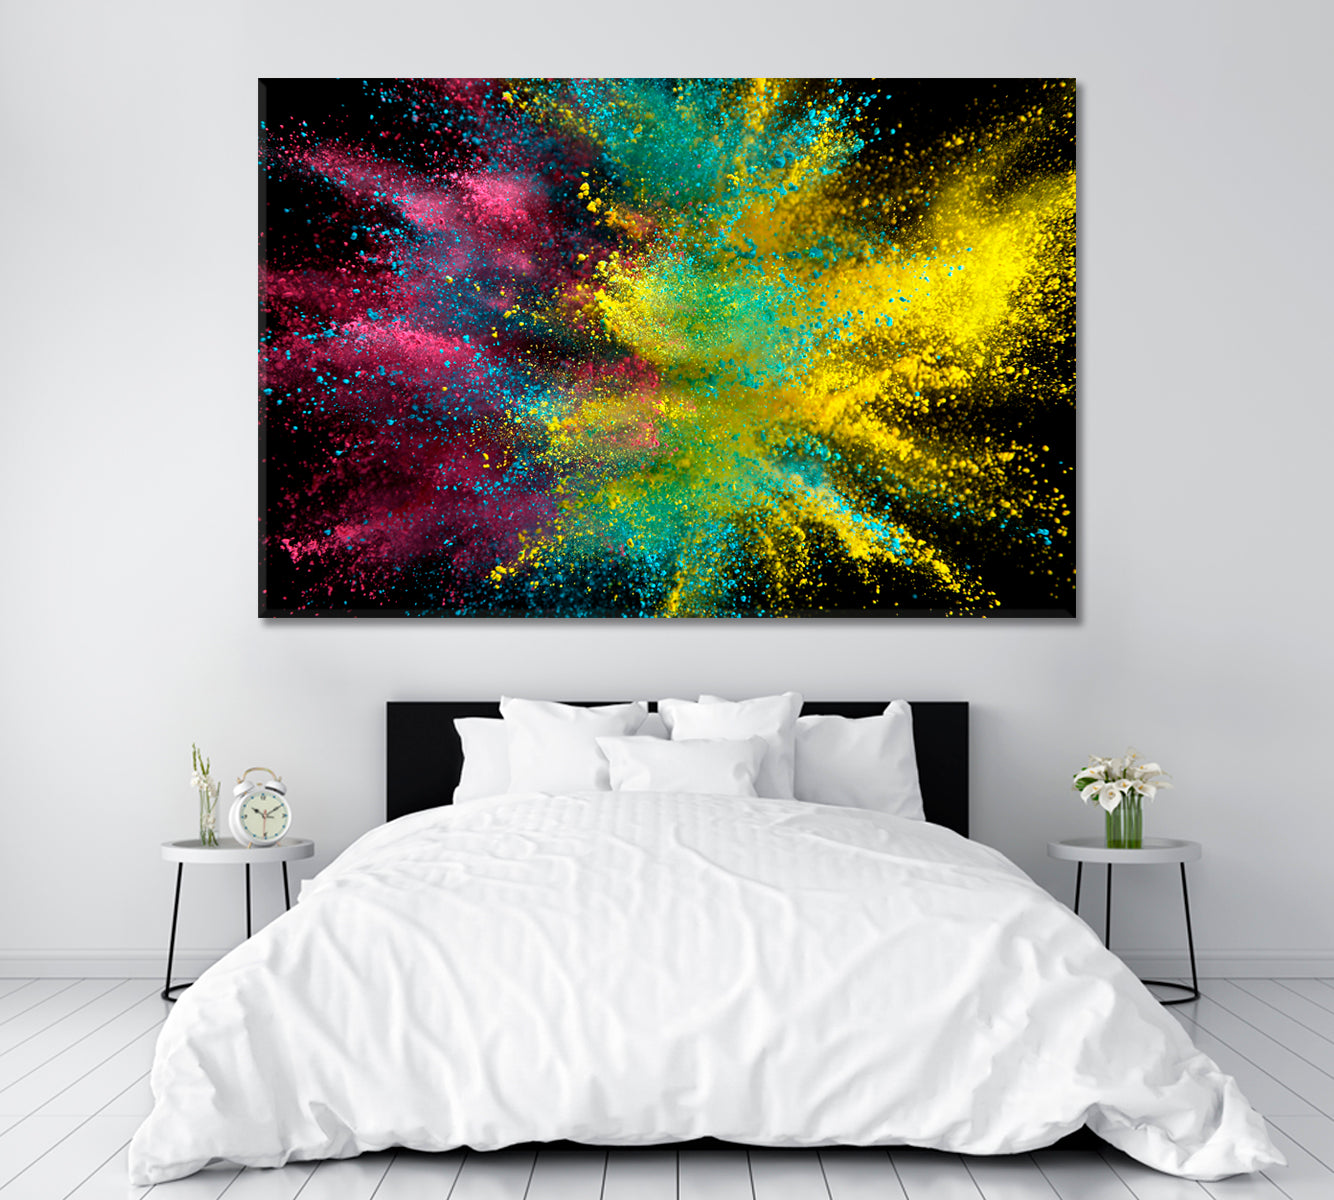 Colorful Powder Explosion Canvas Print ArtLexy 1 Panel 24"x16" inches 